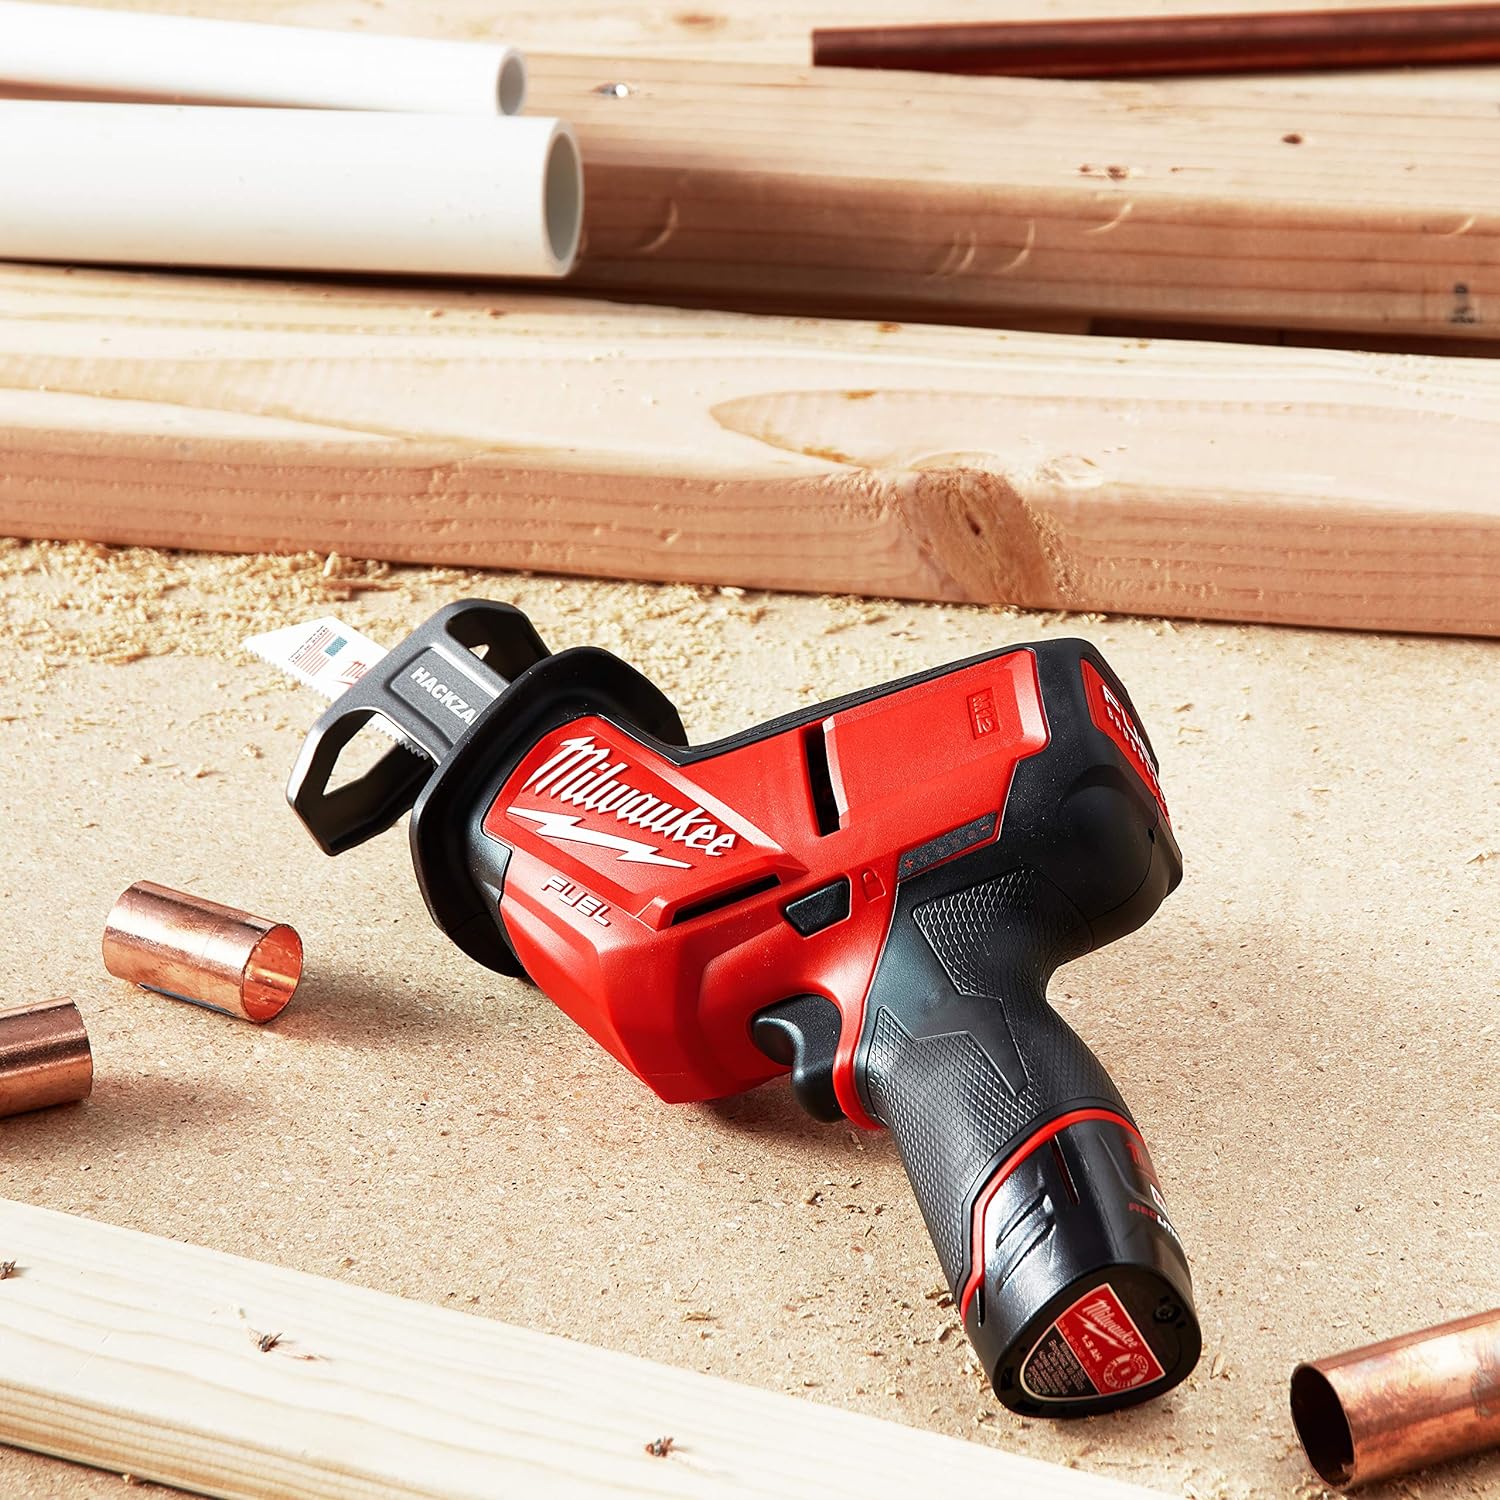 Milwaukee 2520-20 M12 Fuel Hackzall Bare Tool Review